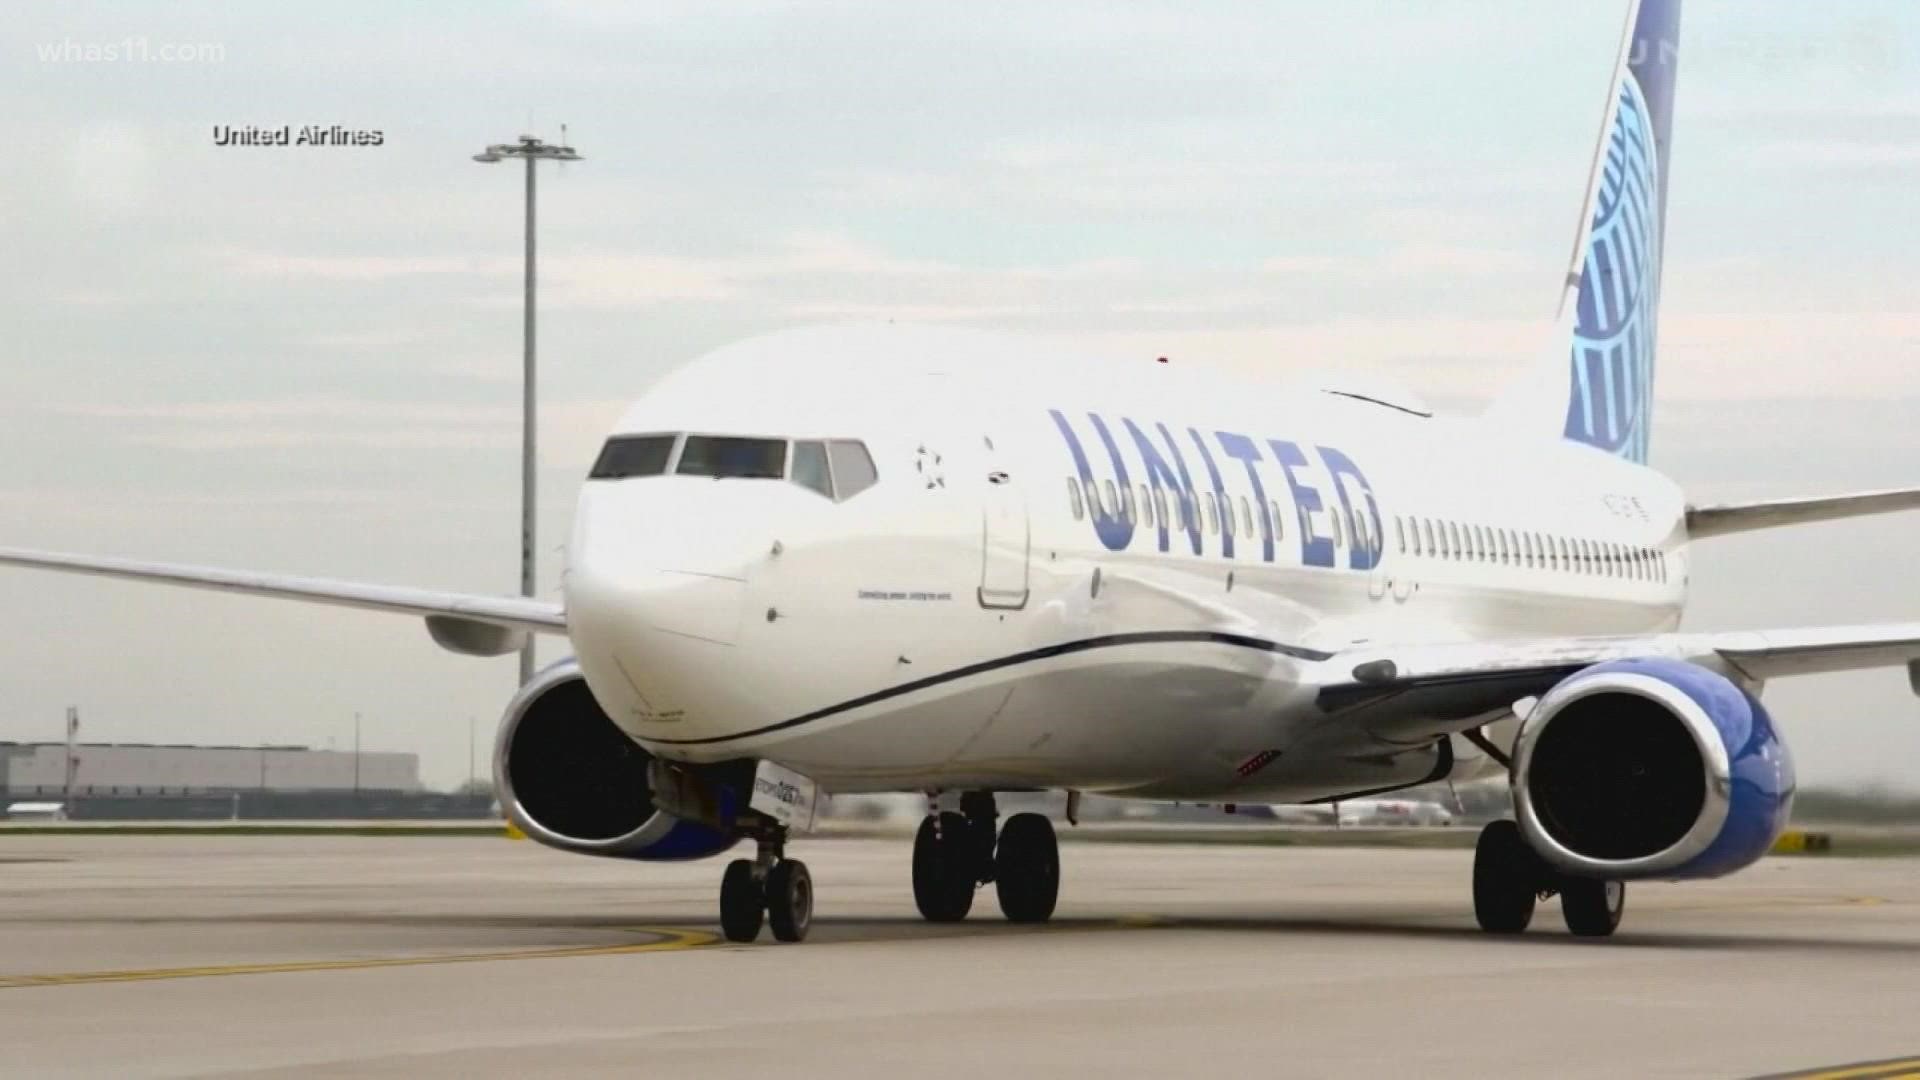 United, which has 67,000 employees in the United States, is the first major U.S. airline to announce it will require vaccination for workers.